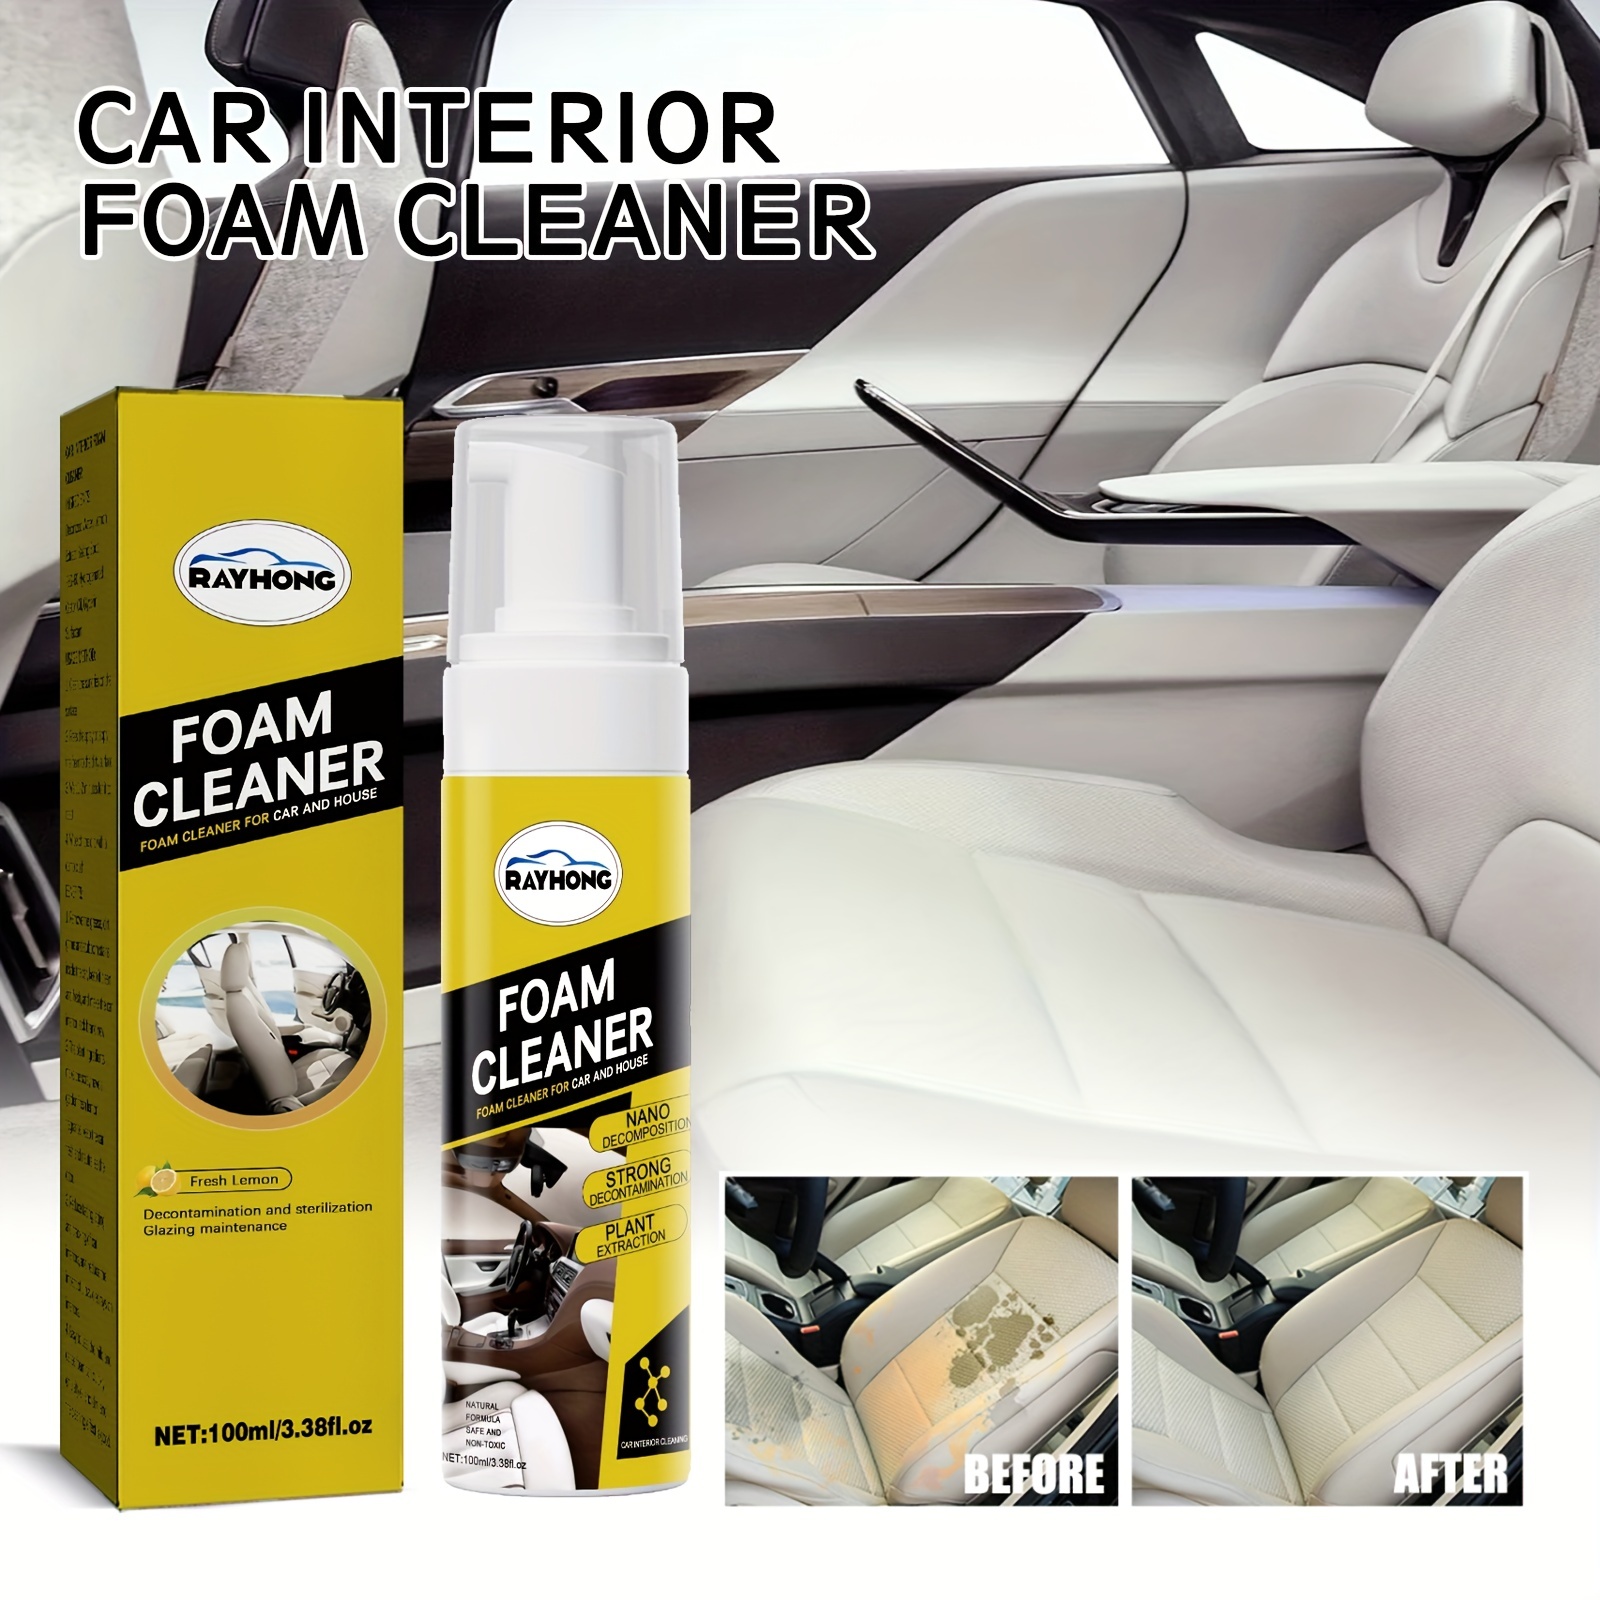 Car interior cleaning wet wipes car cleaning artifact car roof leather seat  care coating strong decontamination cleaning, polishing, nourishing,  protection, mild decontamination without hurting the car body [Super  Recommended] 2 Big Bags [